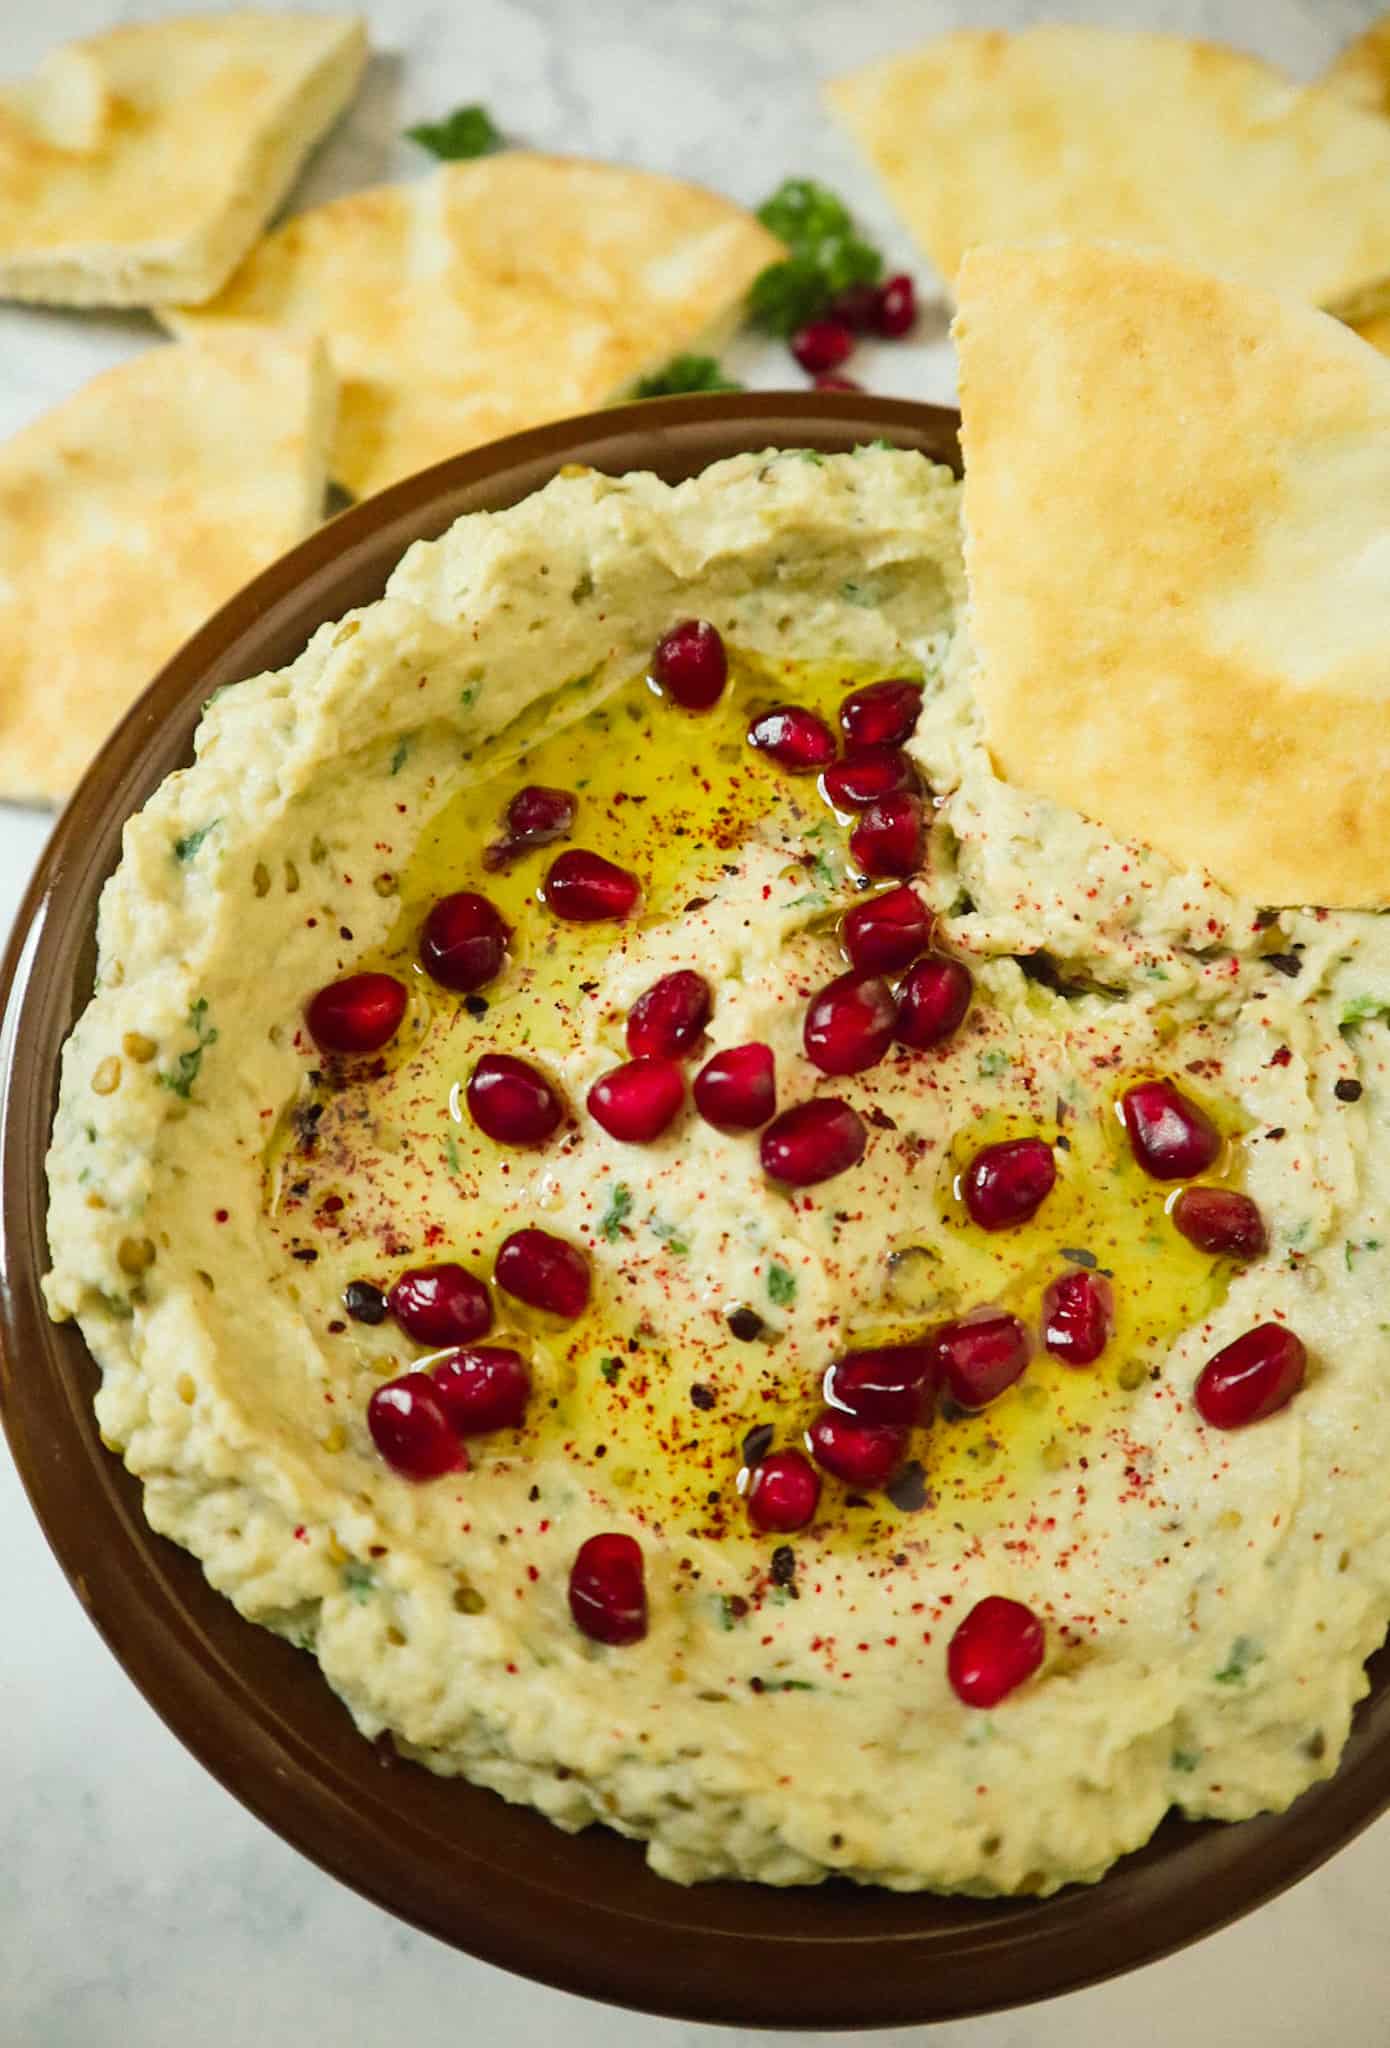 A bowl of baba ganough with pomegranate seeds, sumac and olive oil. slices of pita bread on the side